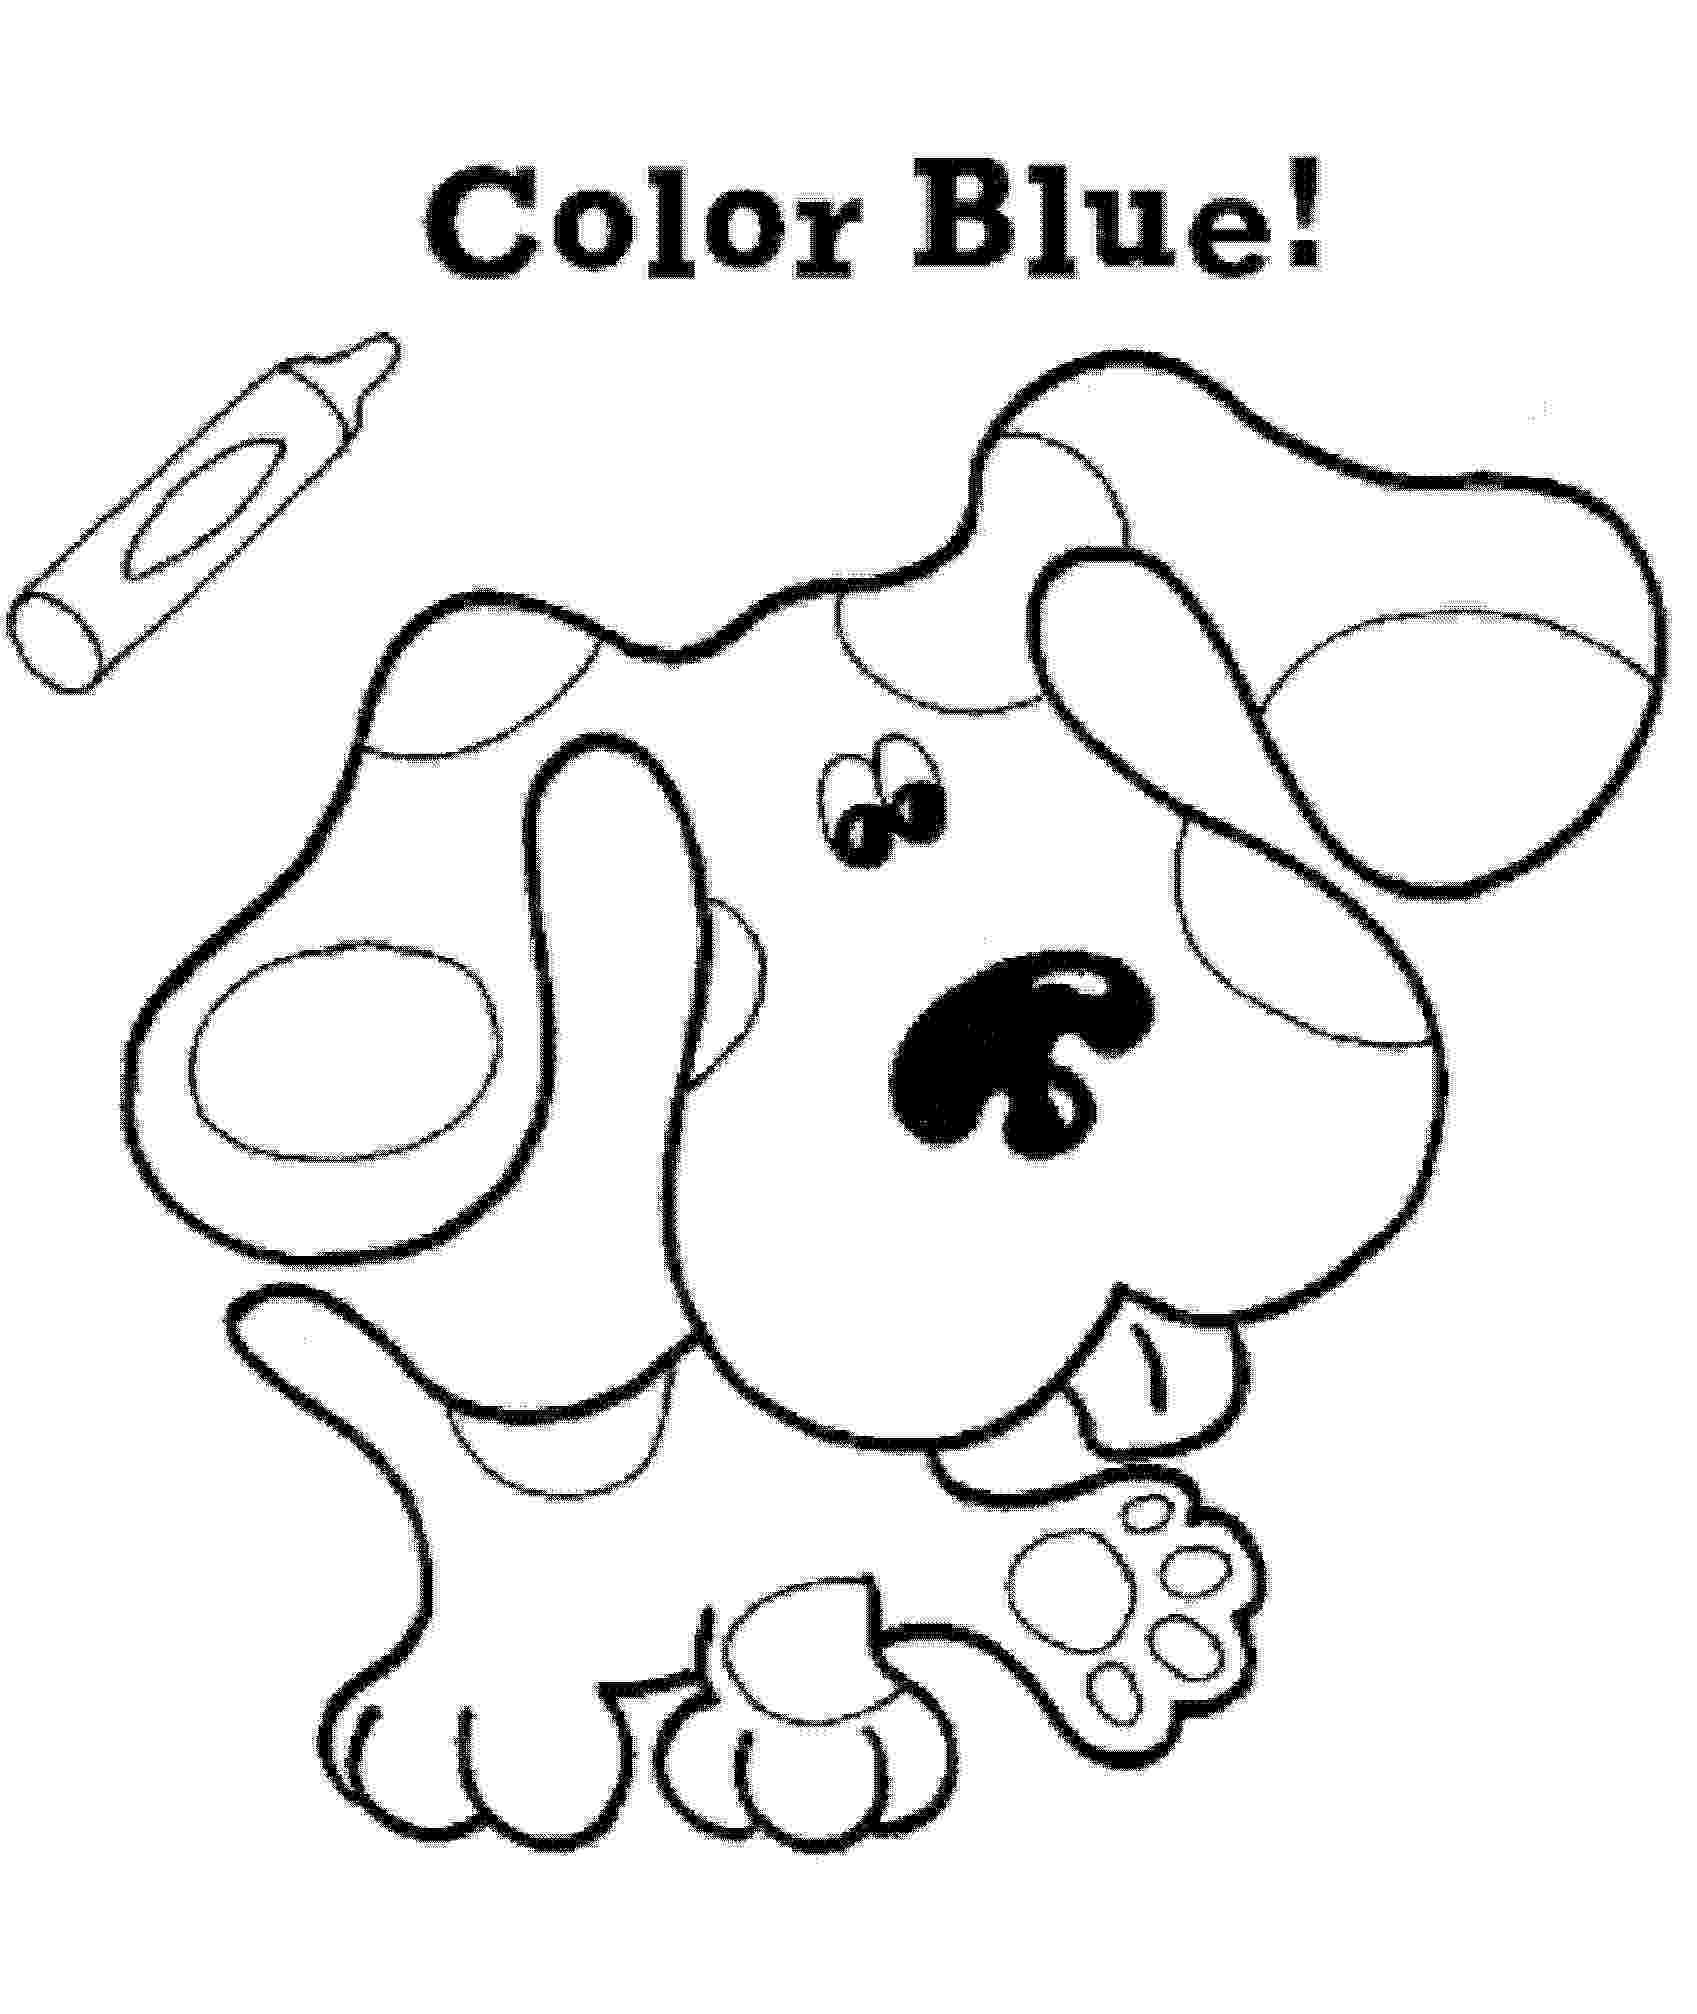 blues clues coloring pages free printable blues clues coloring pages for kids clues coloring pages blues 